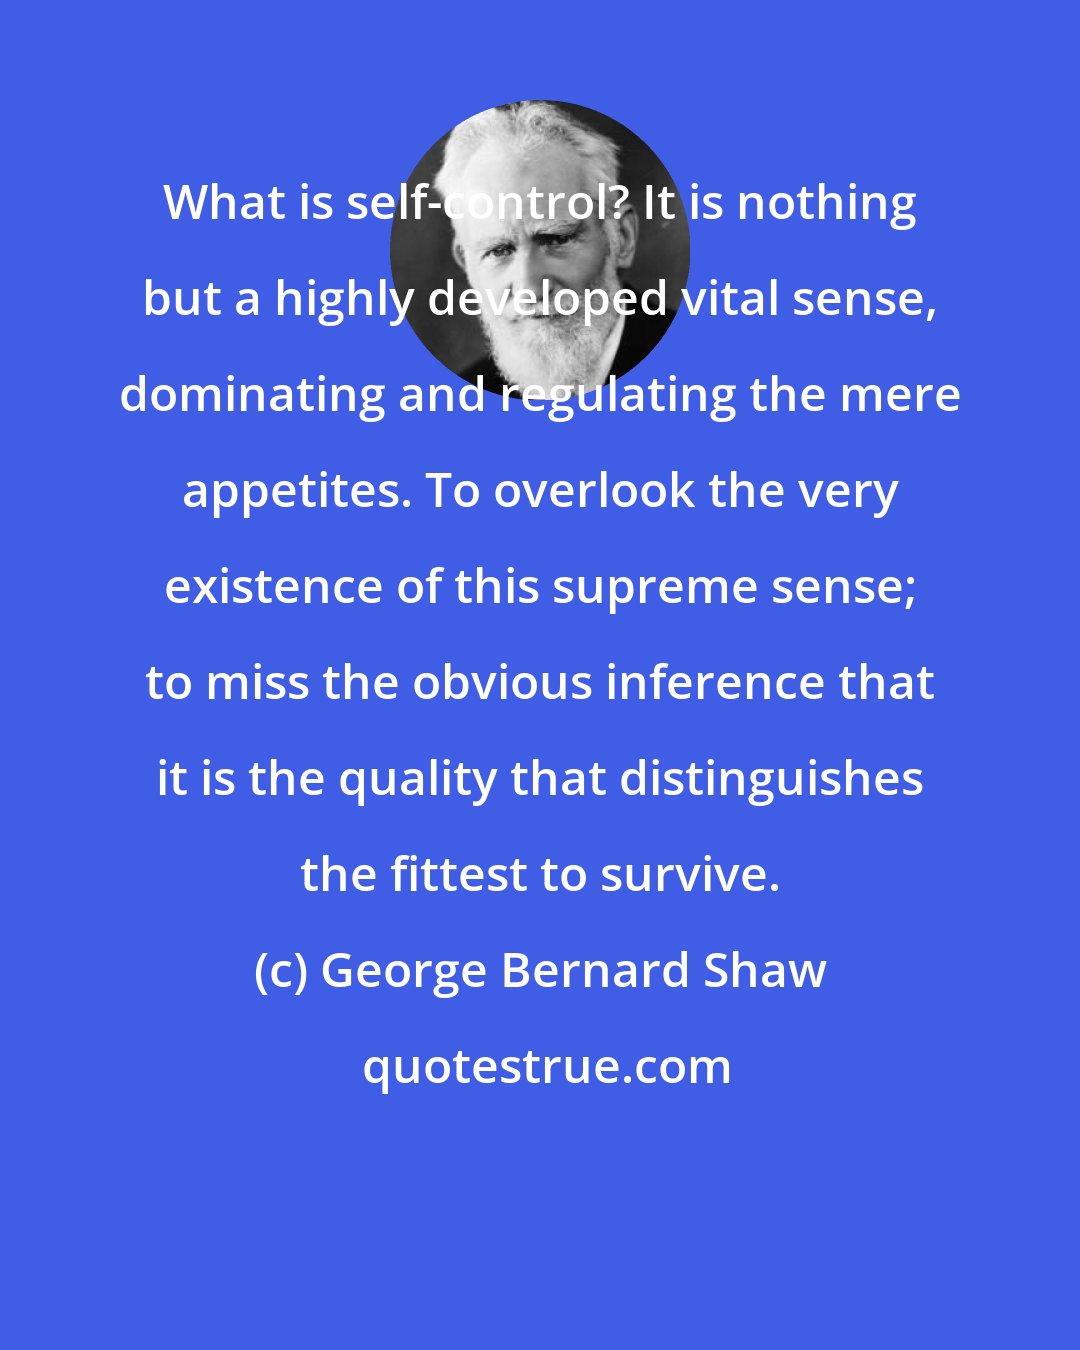 George Bernard Shaw: What is self-control? It is nothing but a highly developed vital sense, dominating and regulating the mere appetites. To overlook the very existence of this supreme sense; to miss the obvious inference that it is the quality that distinguishes the fittest to survive.